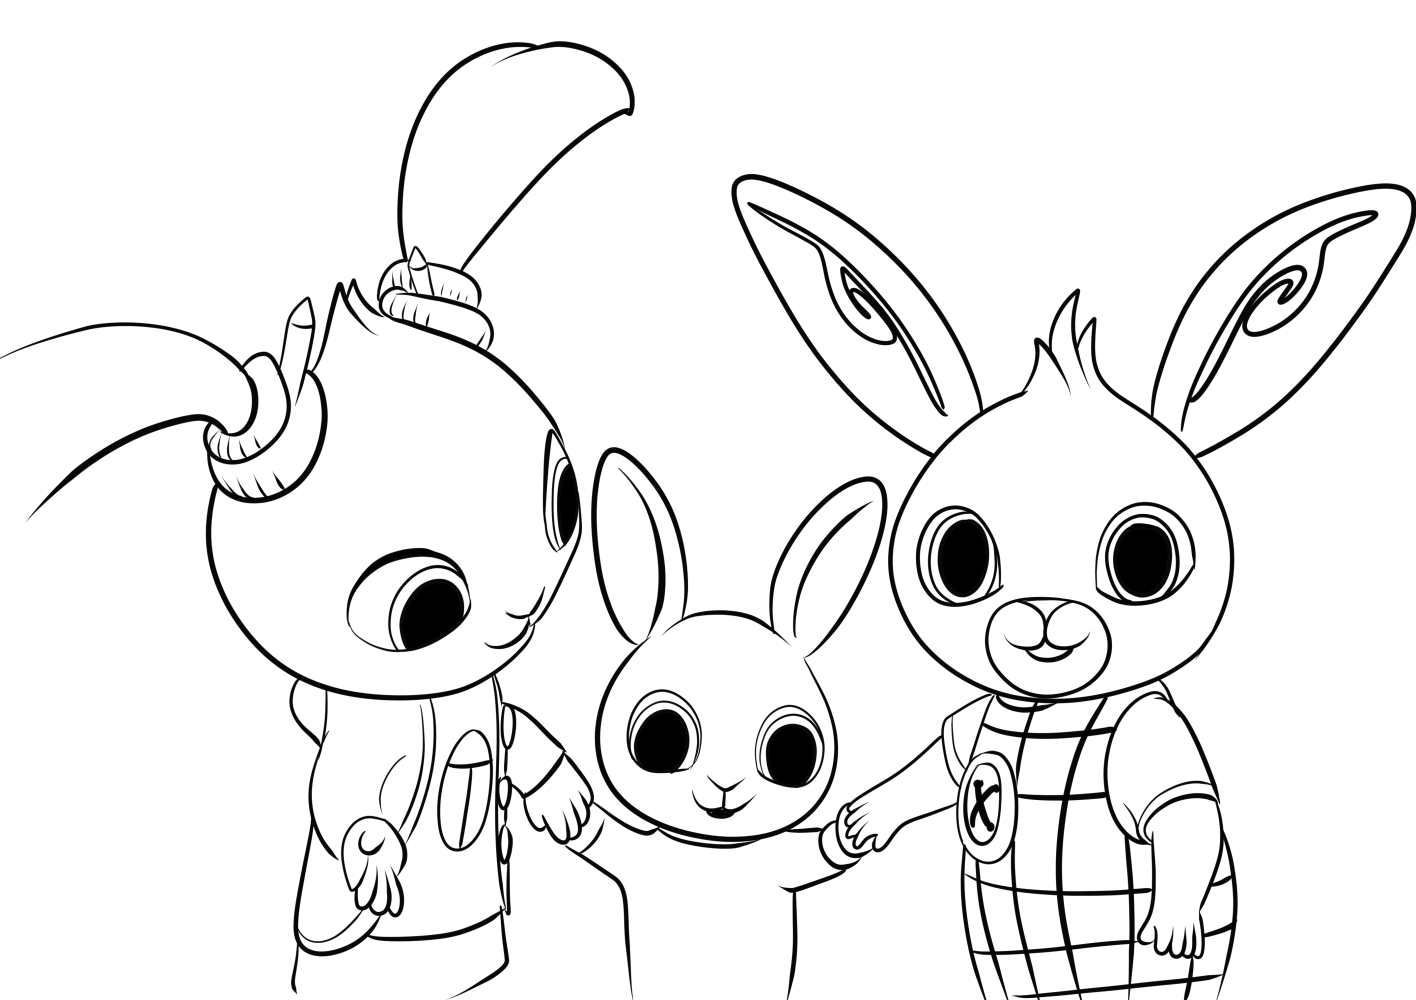 Bing, Charlie, Coco coloring page